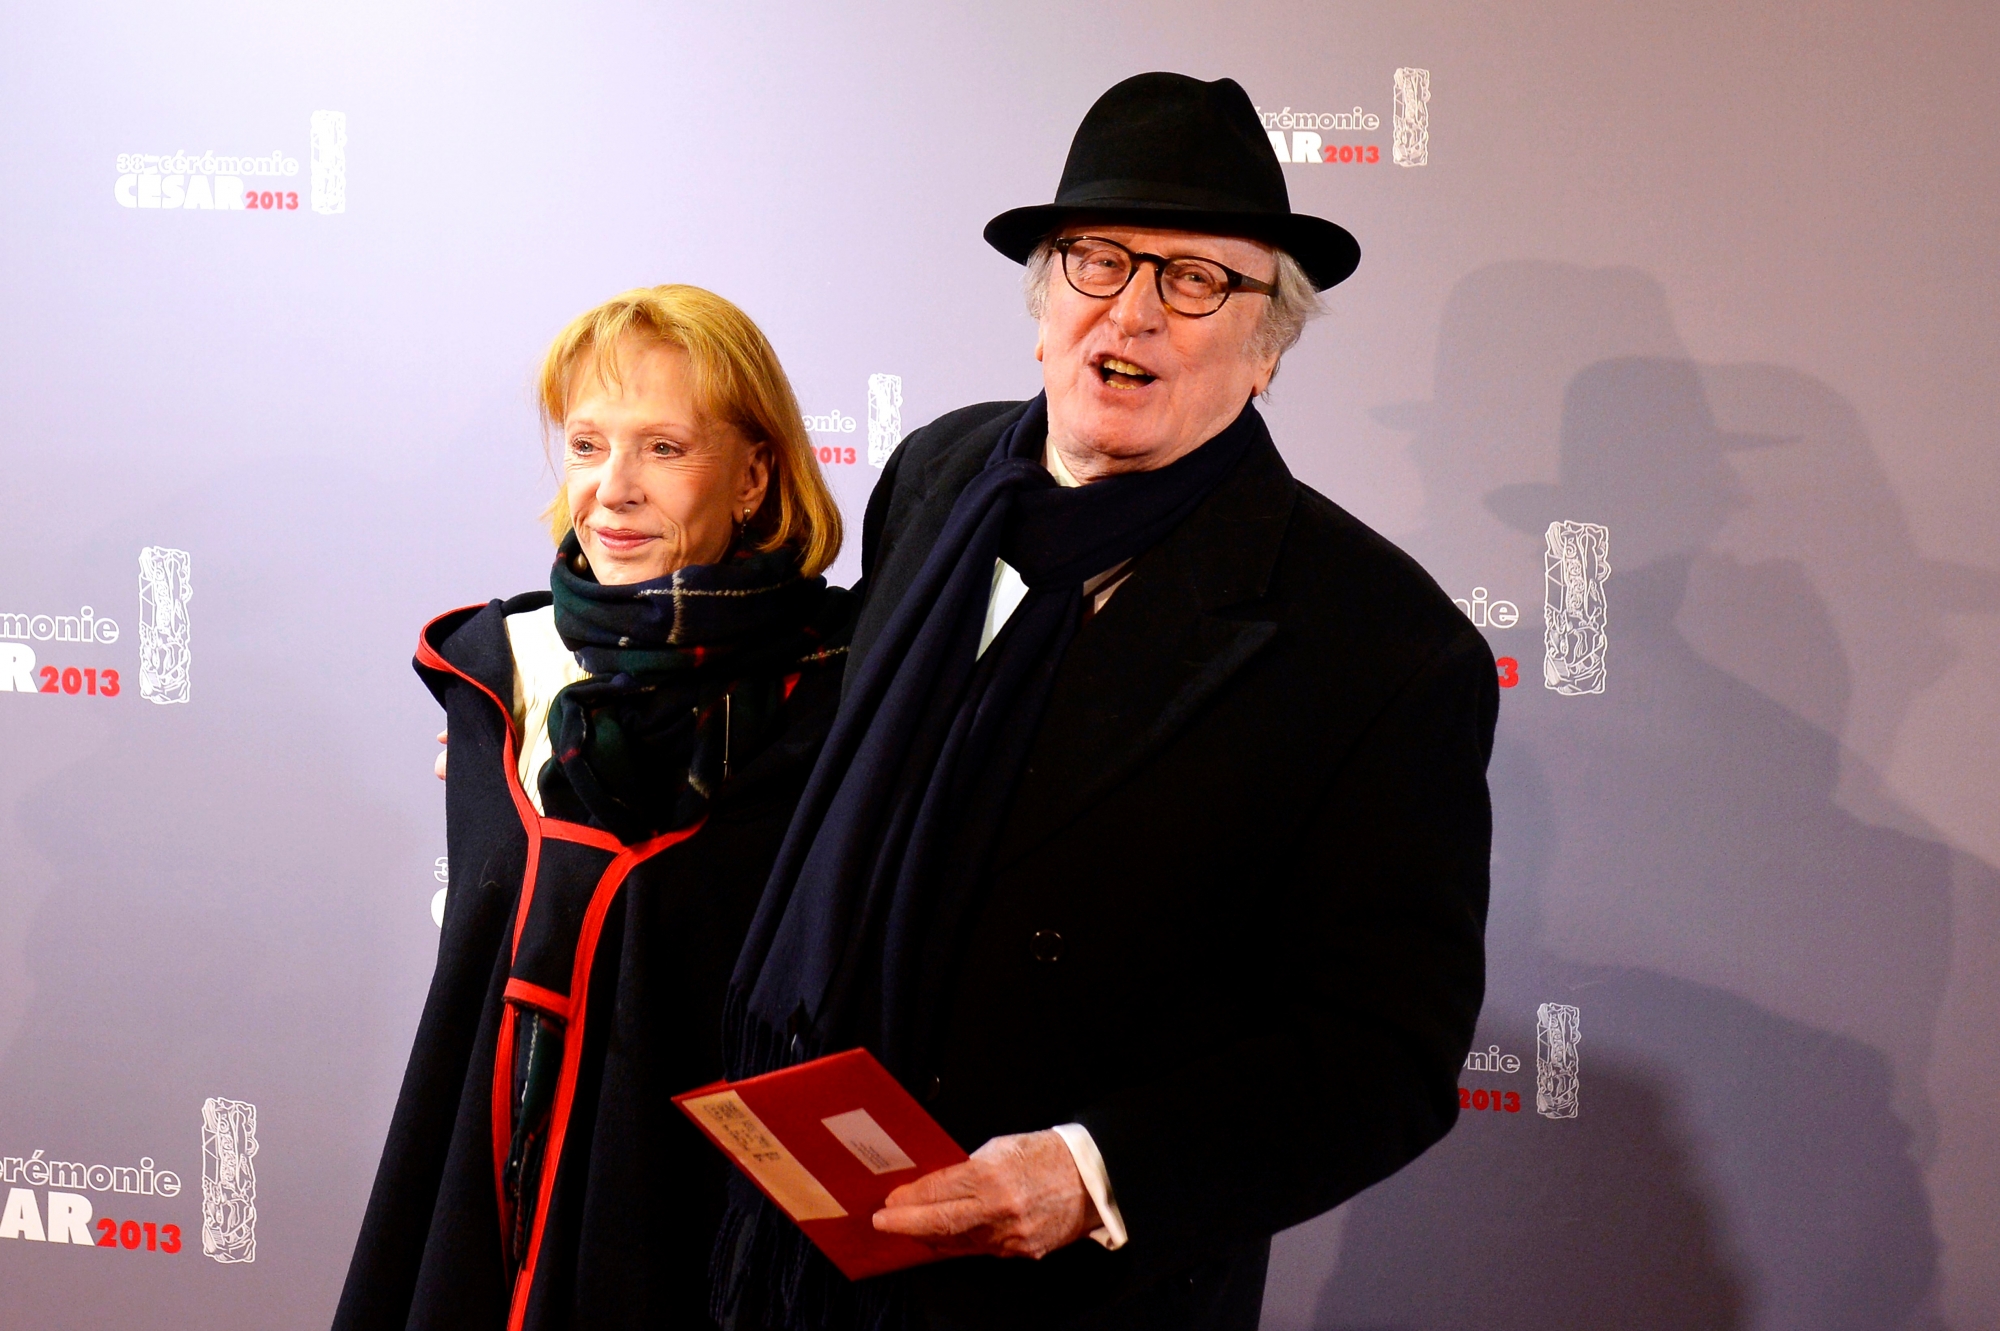 epa06100773 (FILE) French actors Claude Rich (R) and wife Catherine Rich (L) arrive for the 38th annual Cesar awards ceremony held at the Chatelet Theatre in Paris, France, 22 February 2013 (reissued on 21 July 2017). According to reports, Claude Rich died of cancer on 21 July 2017. He was 88.  EPA/CHRISTOPHE KARABA (FILE) FRANCE CLAUDE RICH OBIT